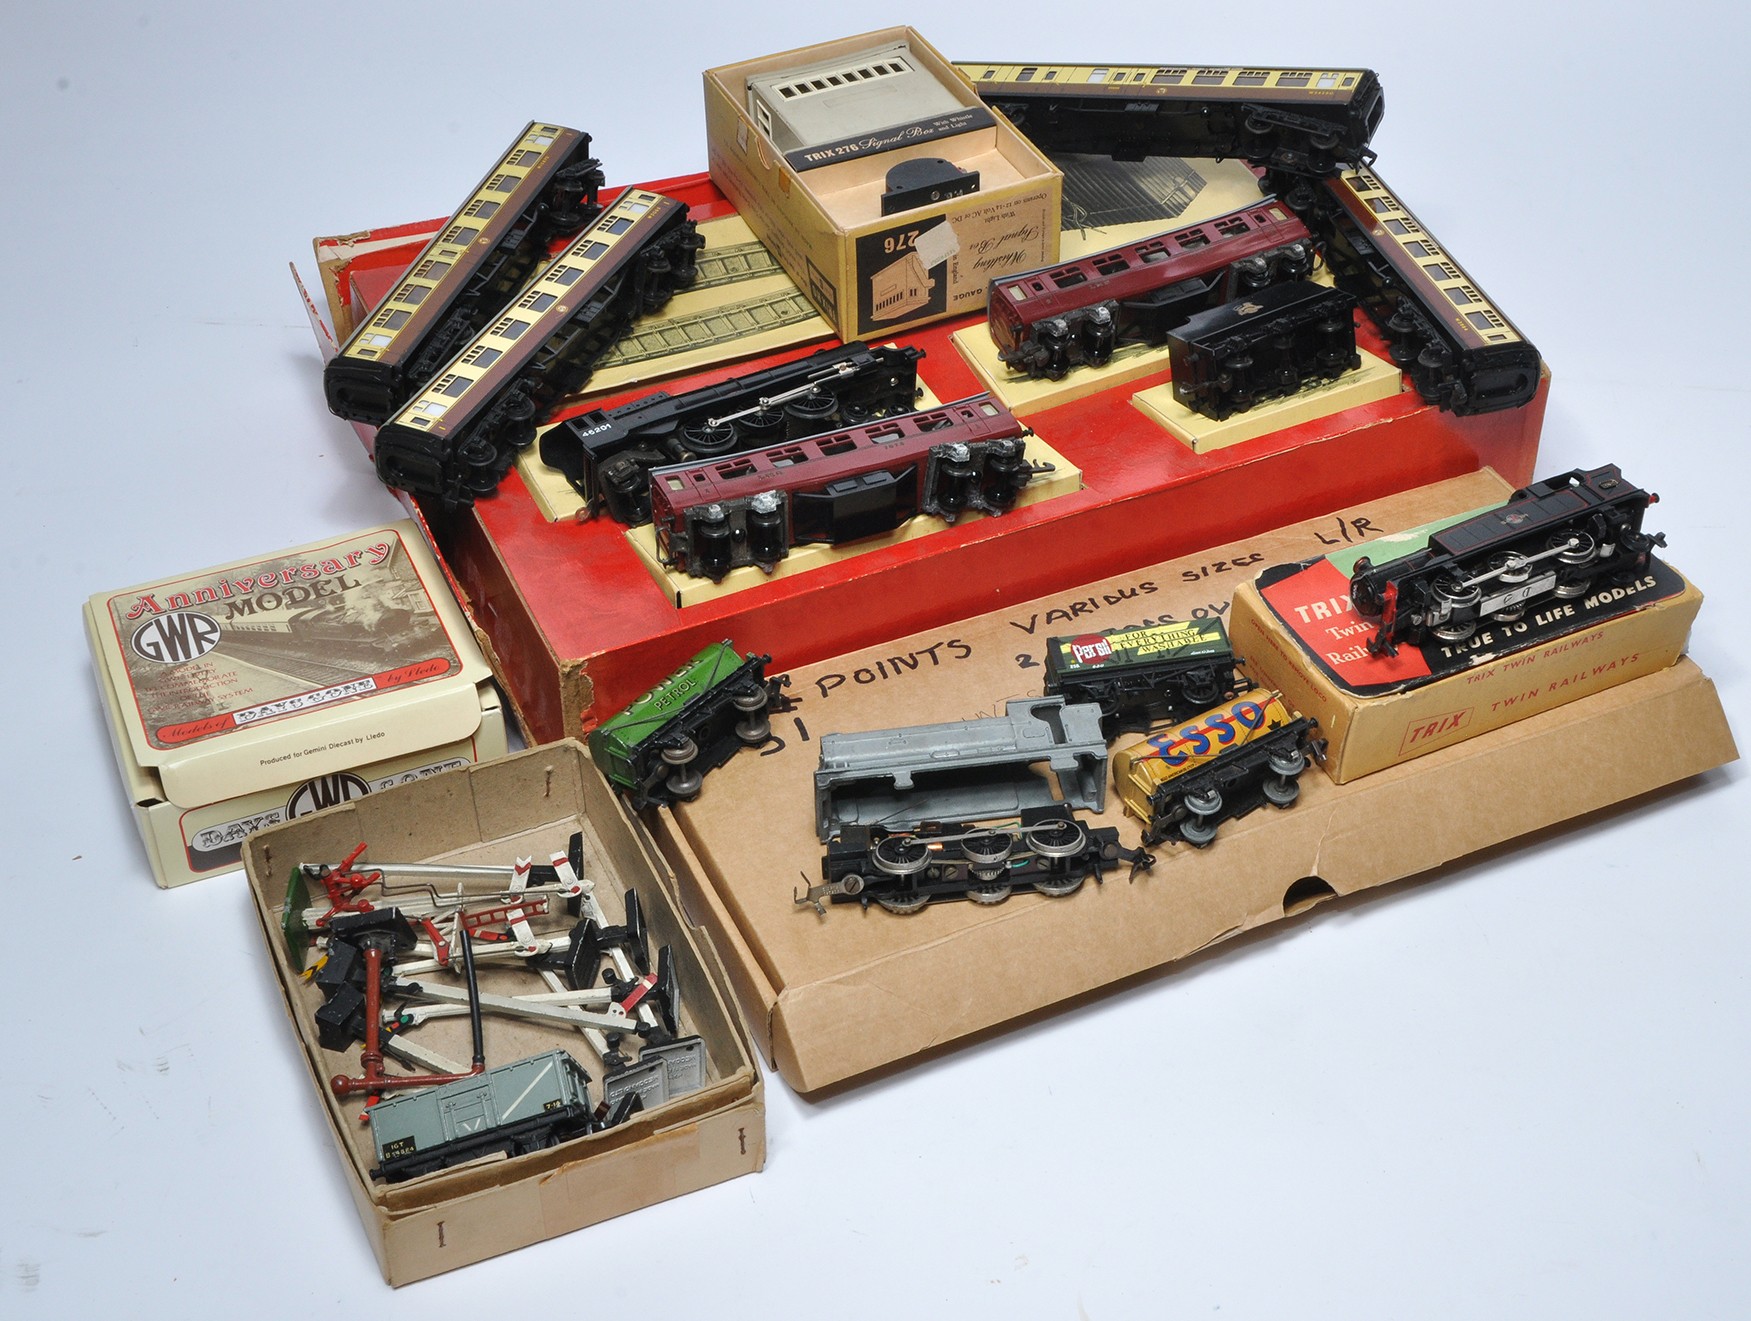 An assorted group of older issue Model Railway including Rovex, Trix and others as shown. Some